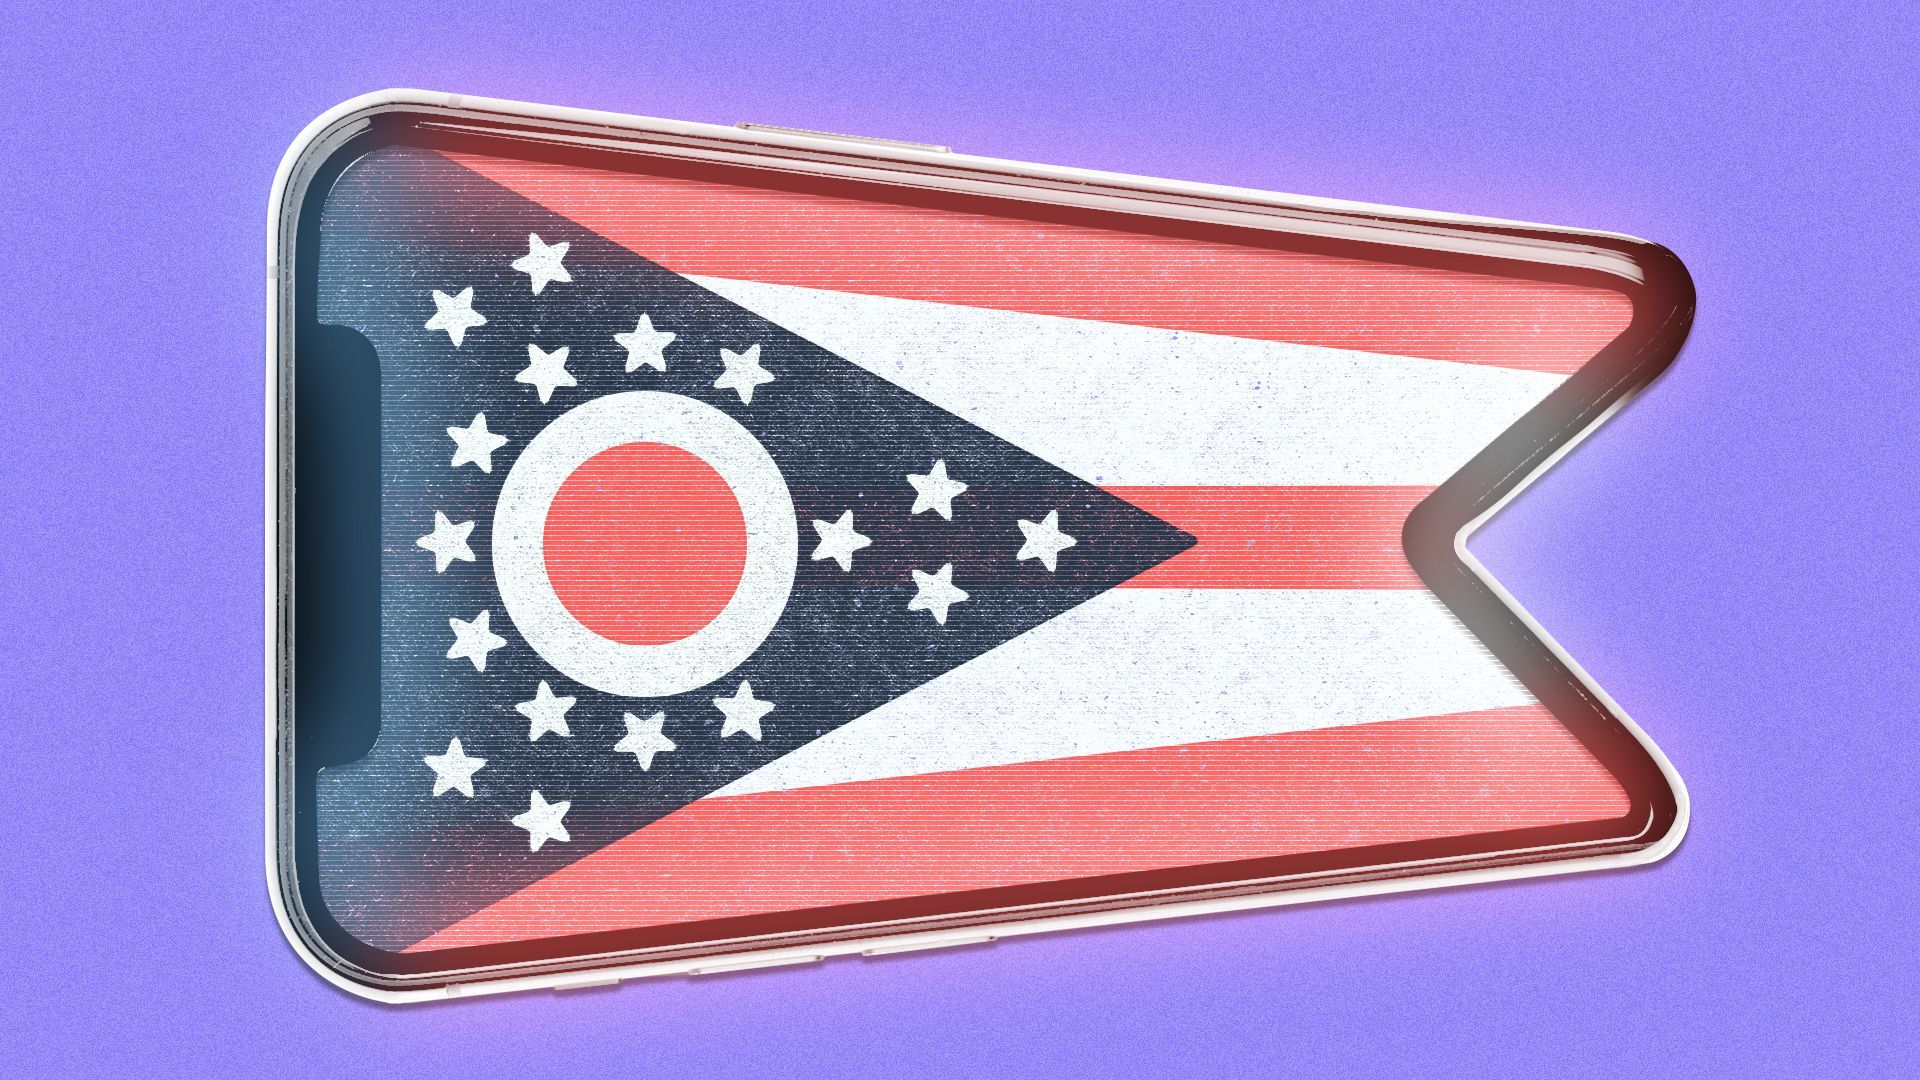 Illustration of a smartphone in the shape of the flag of Ohio, with the flag onscreen.